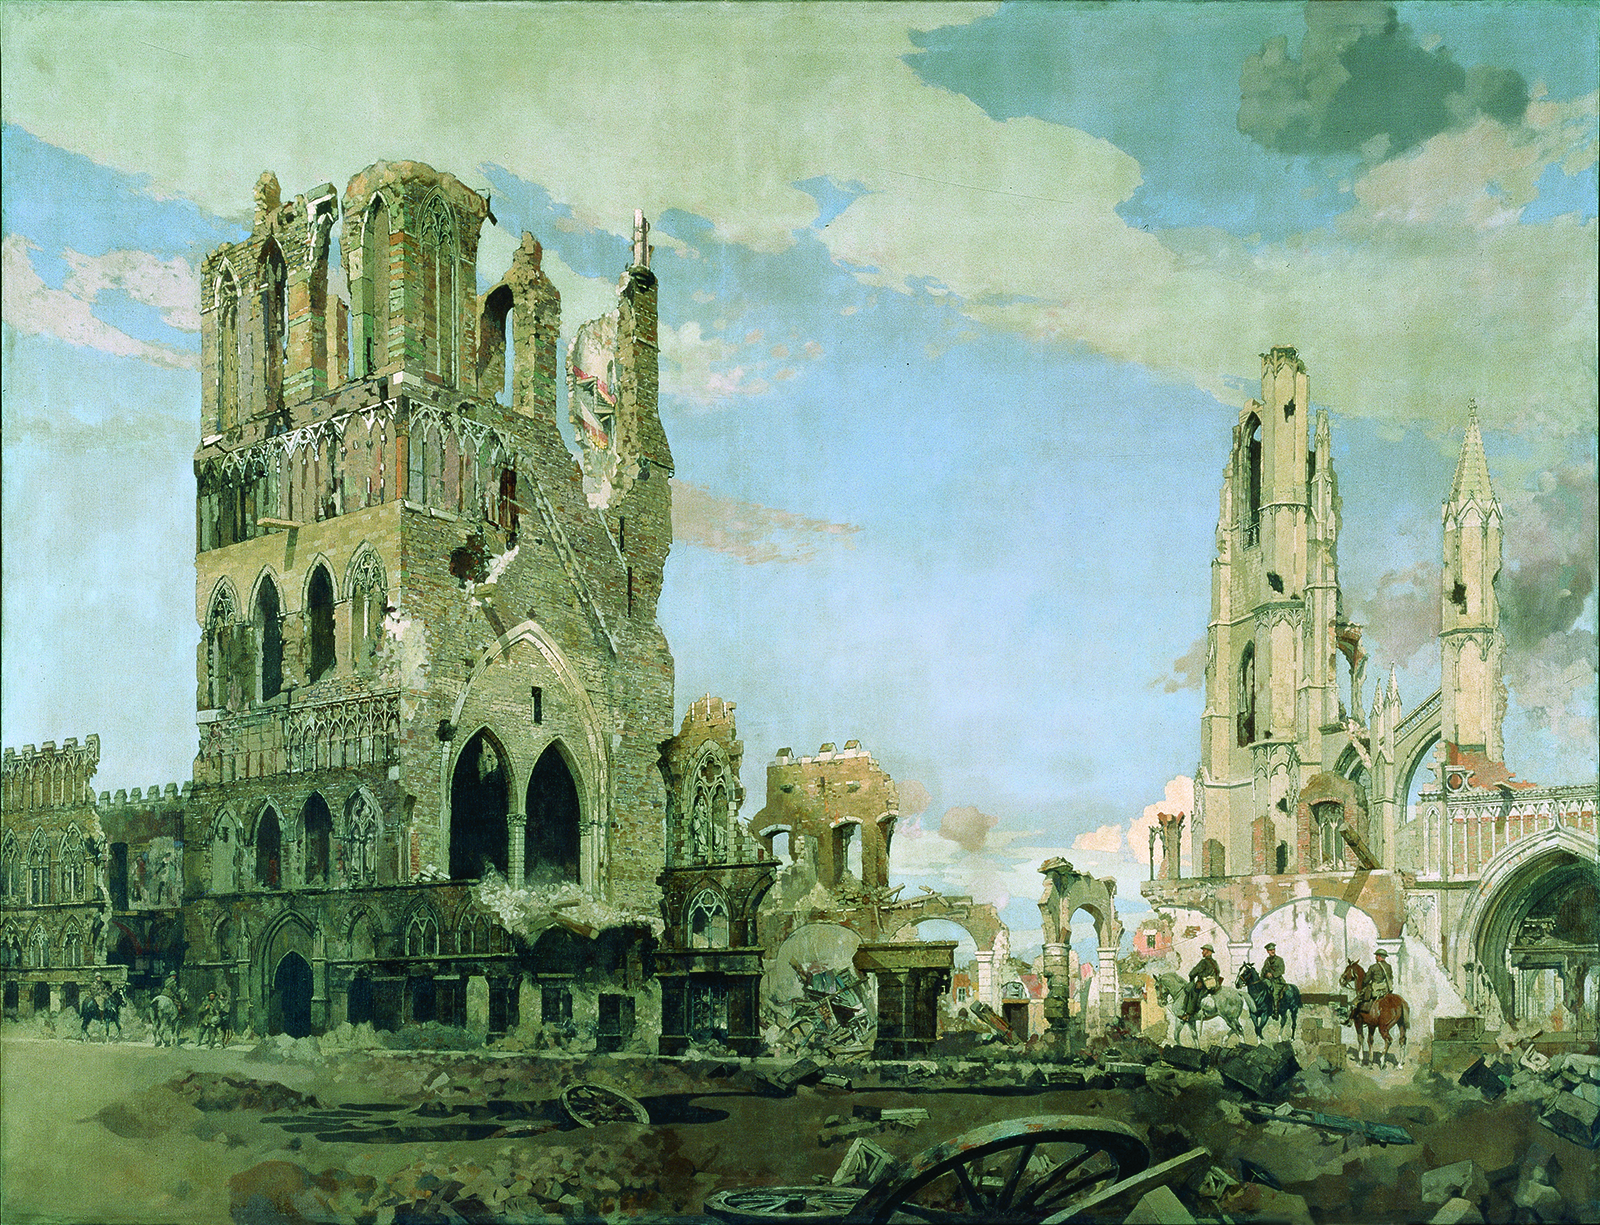 The Second Battle of Ypres in 1915, where Canadian troops endured poison gas and relentless shelling, reduced the once-magnificent Flemish town to ruins. Canadian artist James Kerr-Lawson juxtaposed the clearing smoke of battle with the shattered remains of the cloth hall and cathedral. (Beaverbrook Collection of War Art, Canadian War Museum, CWM 19710261-0334)